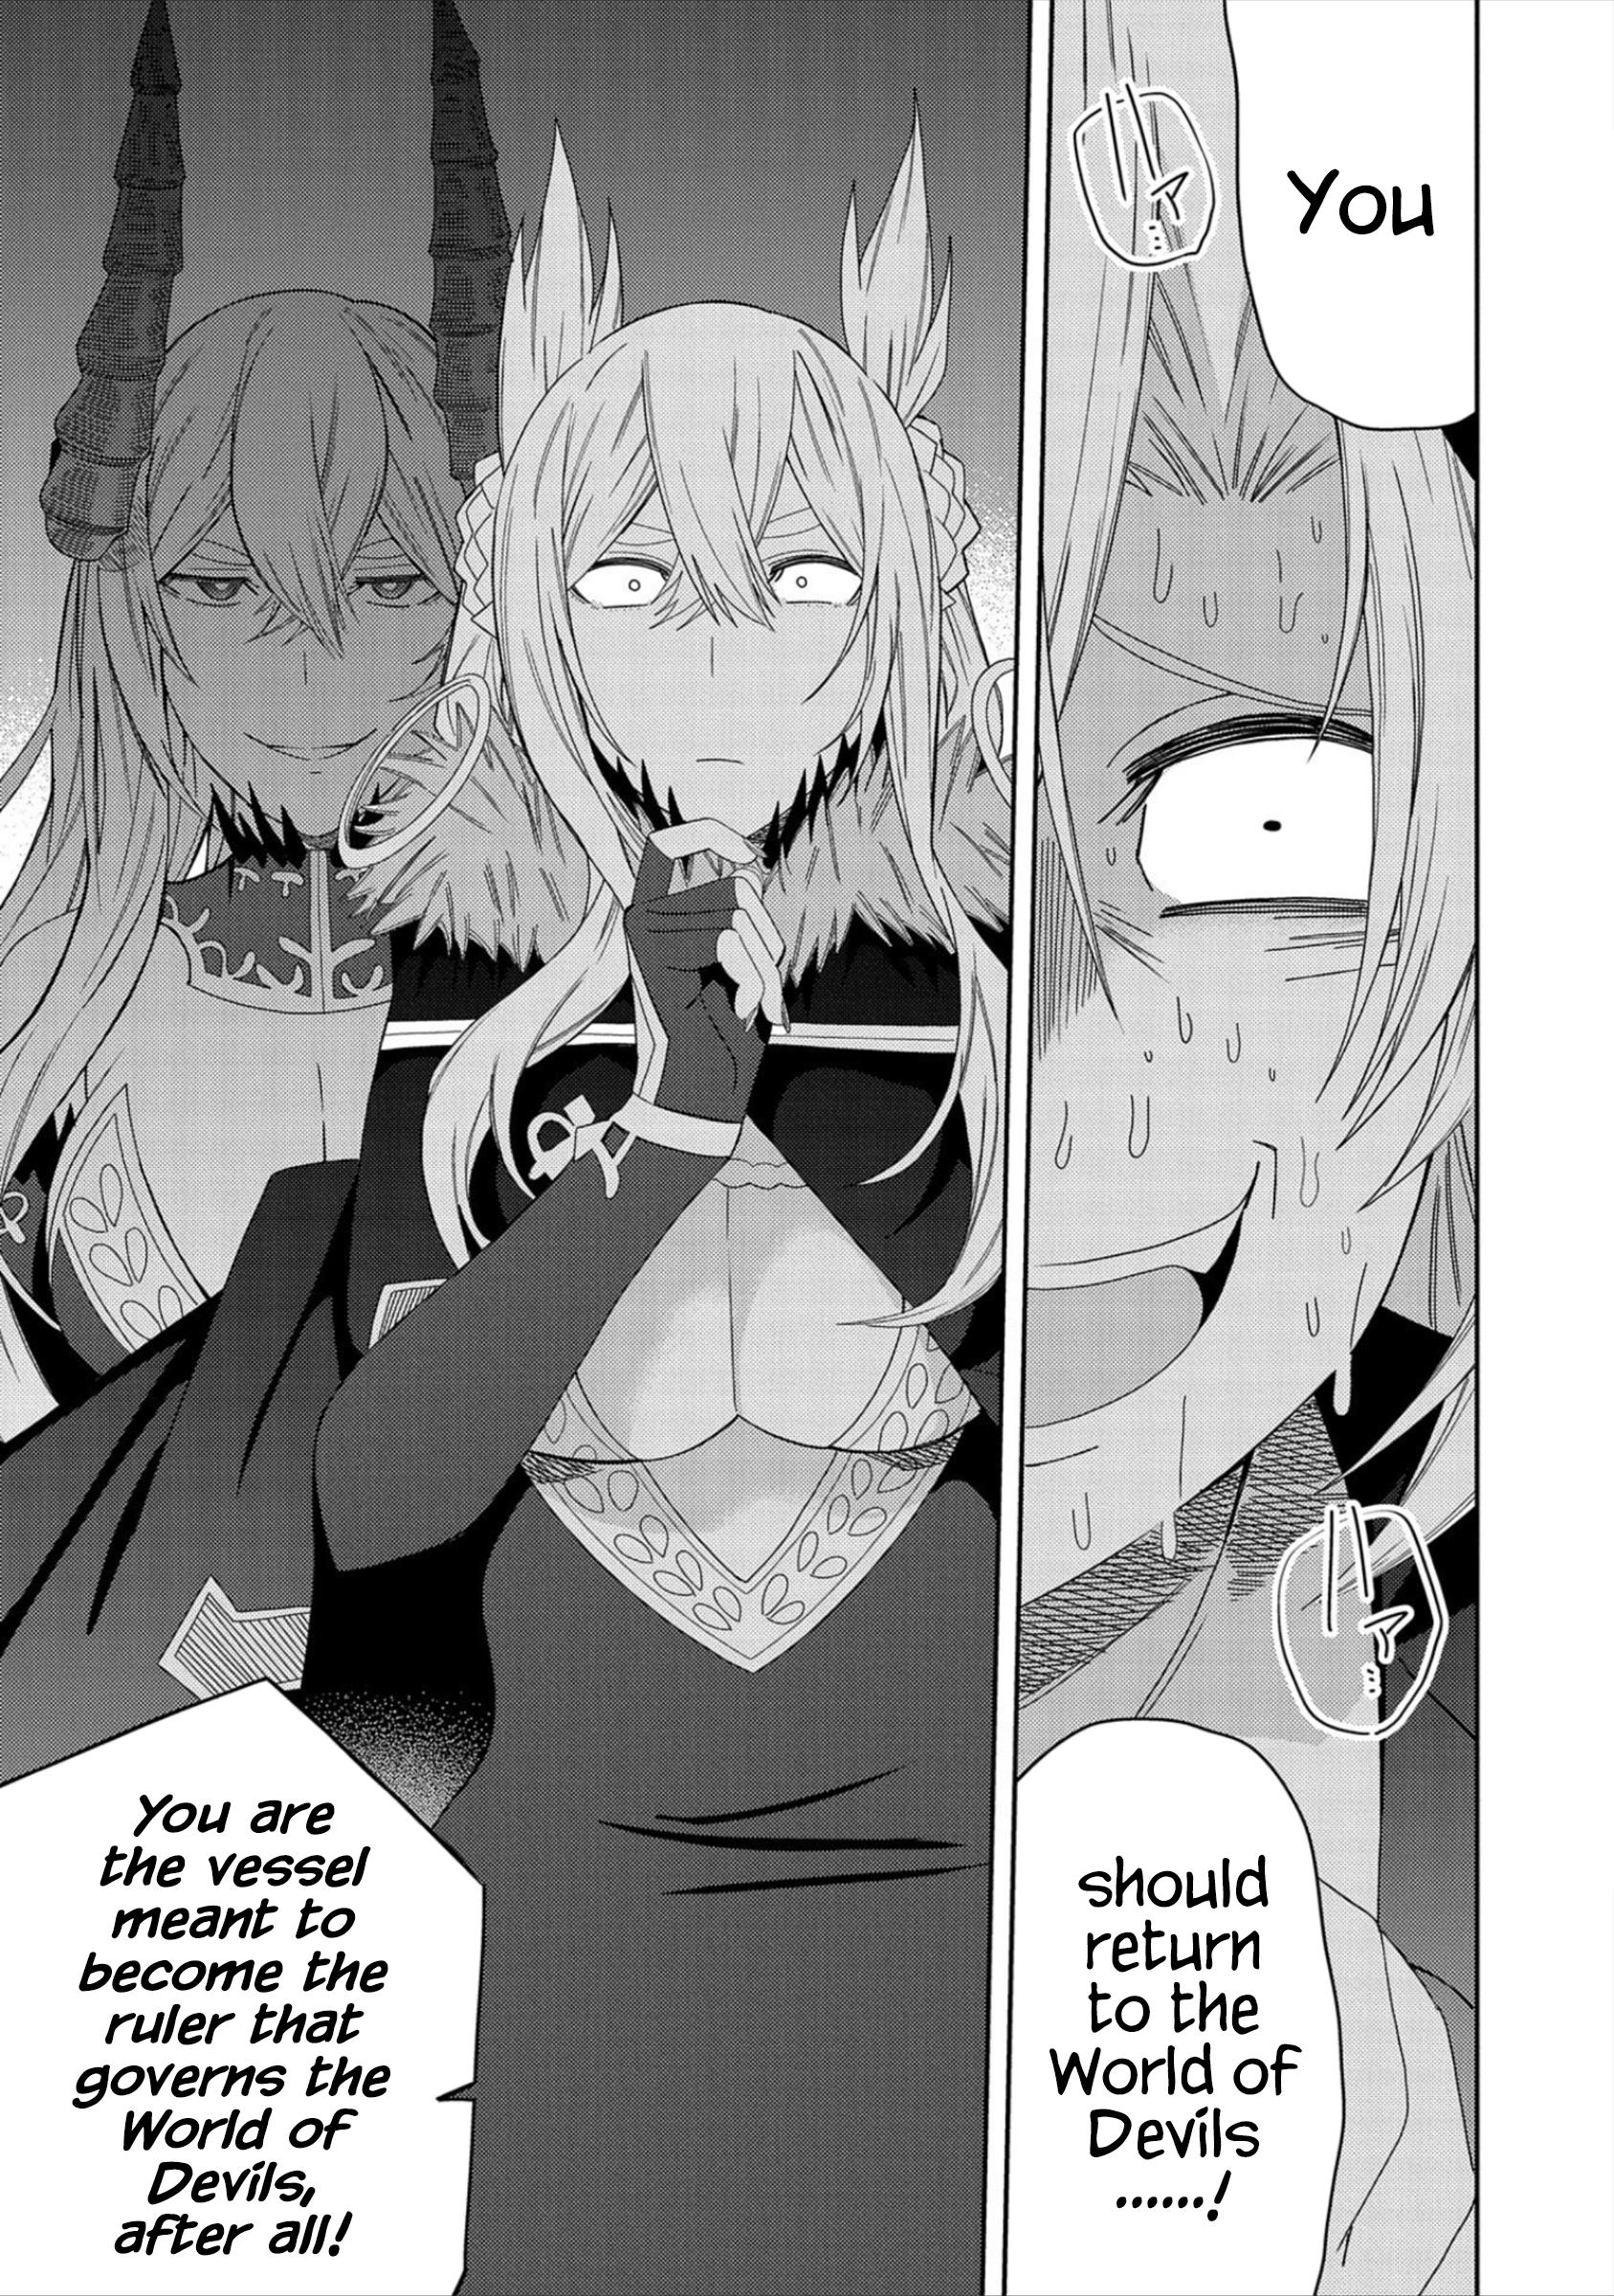 I Summoned The Devil To Grant Me A Wish, But I Married Her Instead Since She Was Adorable ~My New Devil Wife~ Chapter 29: The Ruler Vessel - Picture 1